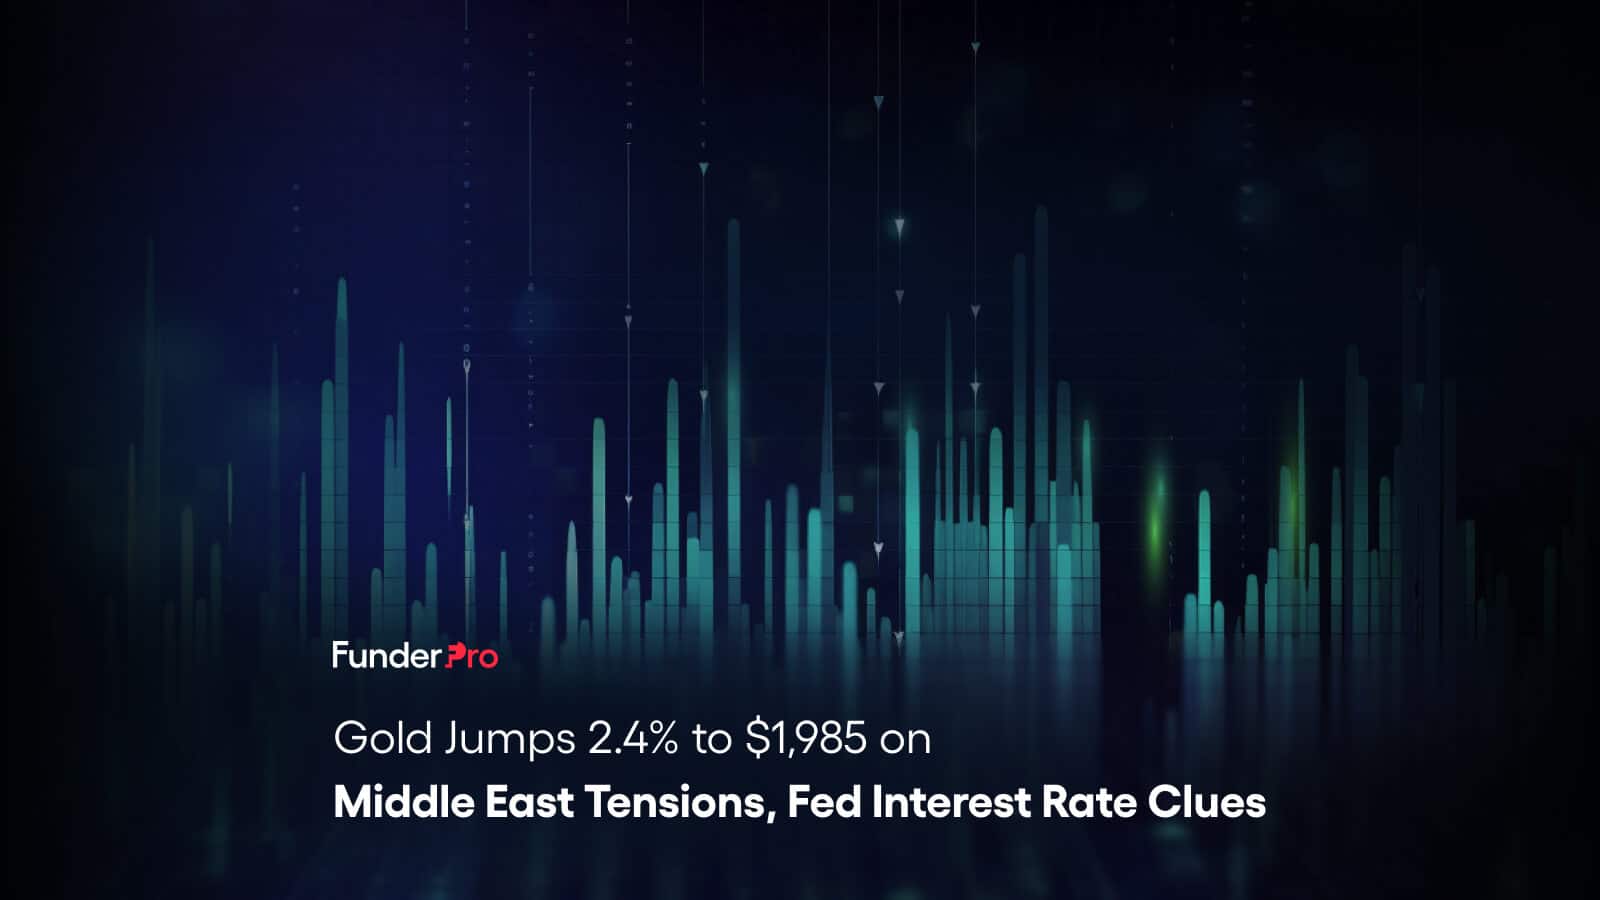 Gold Jumps 2.4% to $1,985 on Middle East Tensions, Fed Interest Rate Clues